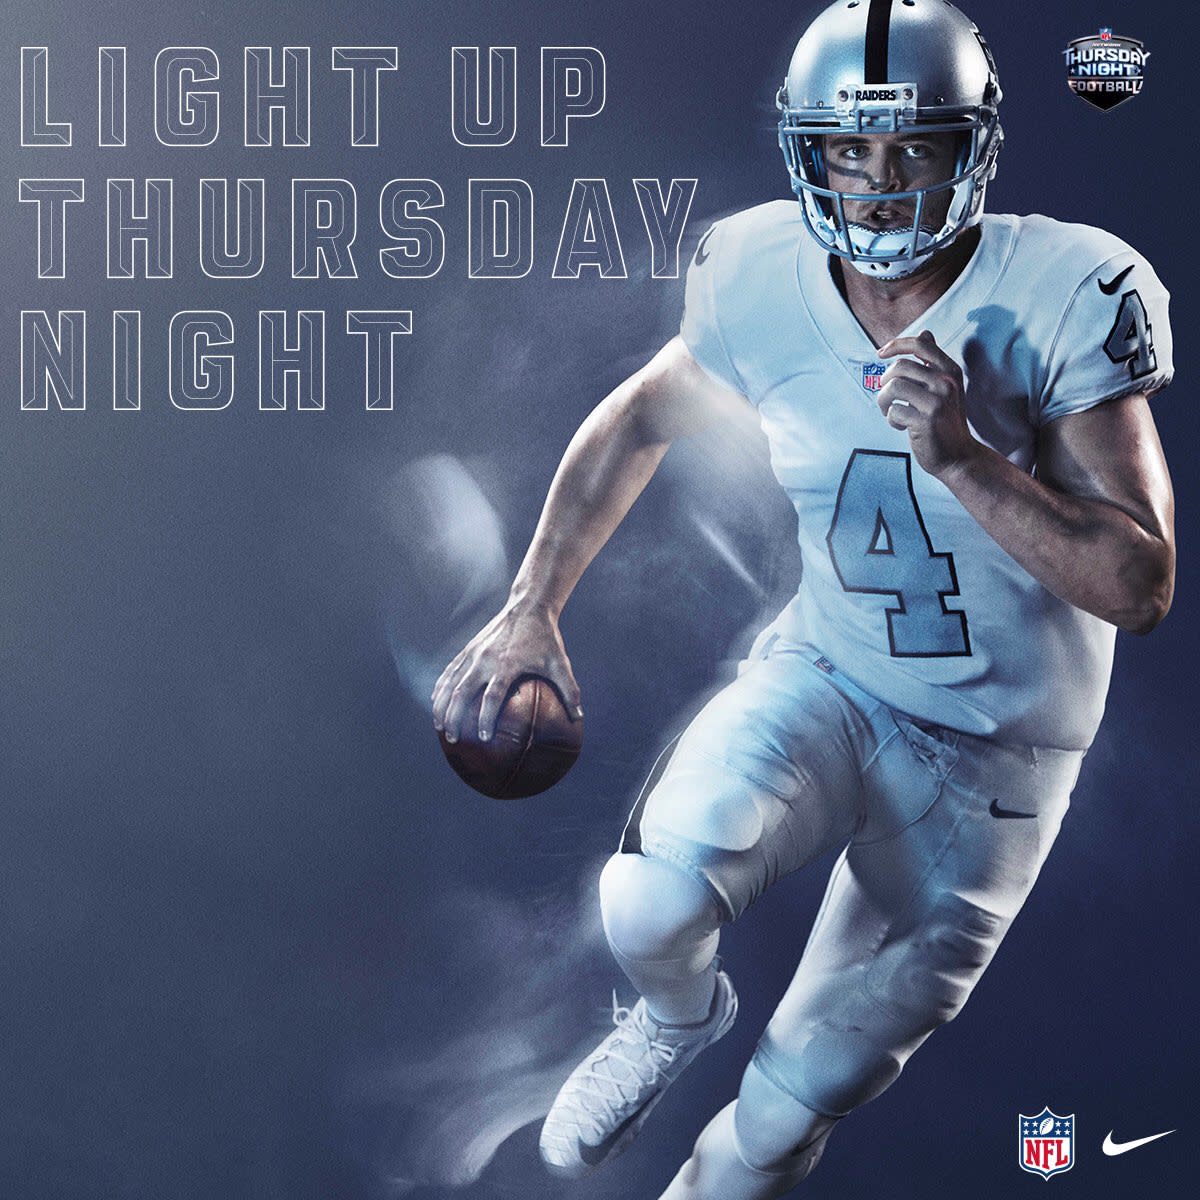 RANKING ALL 32 NFL COLOR RUSH UNIFORMS 